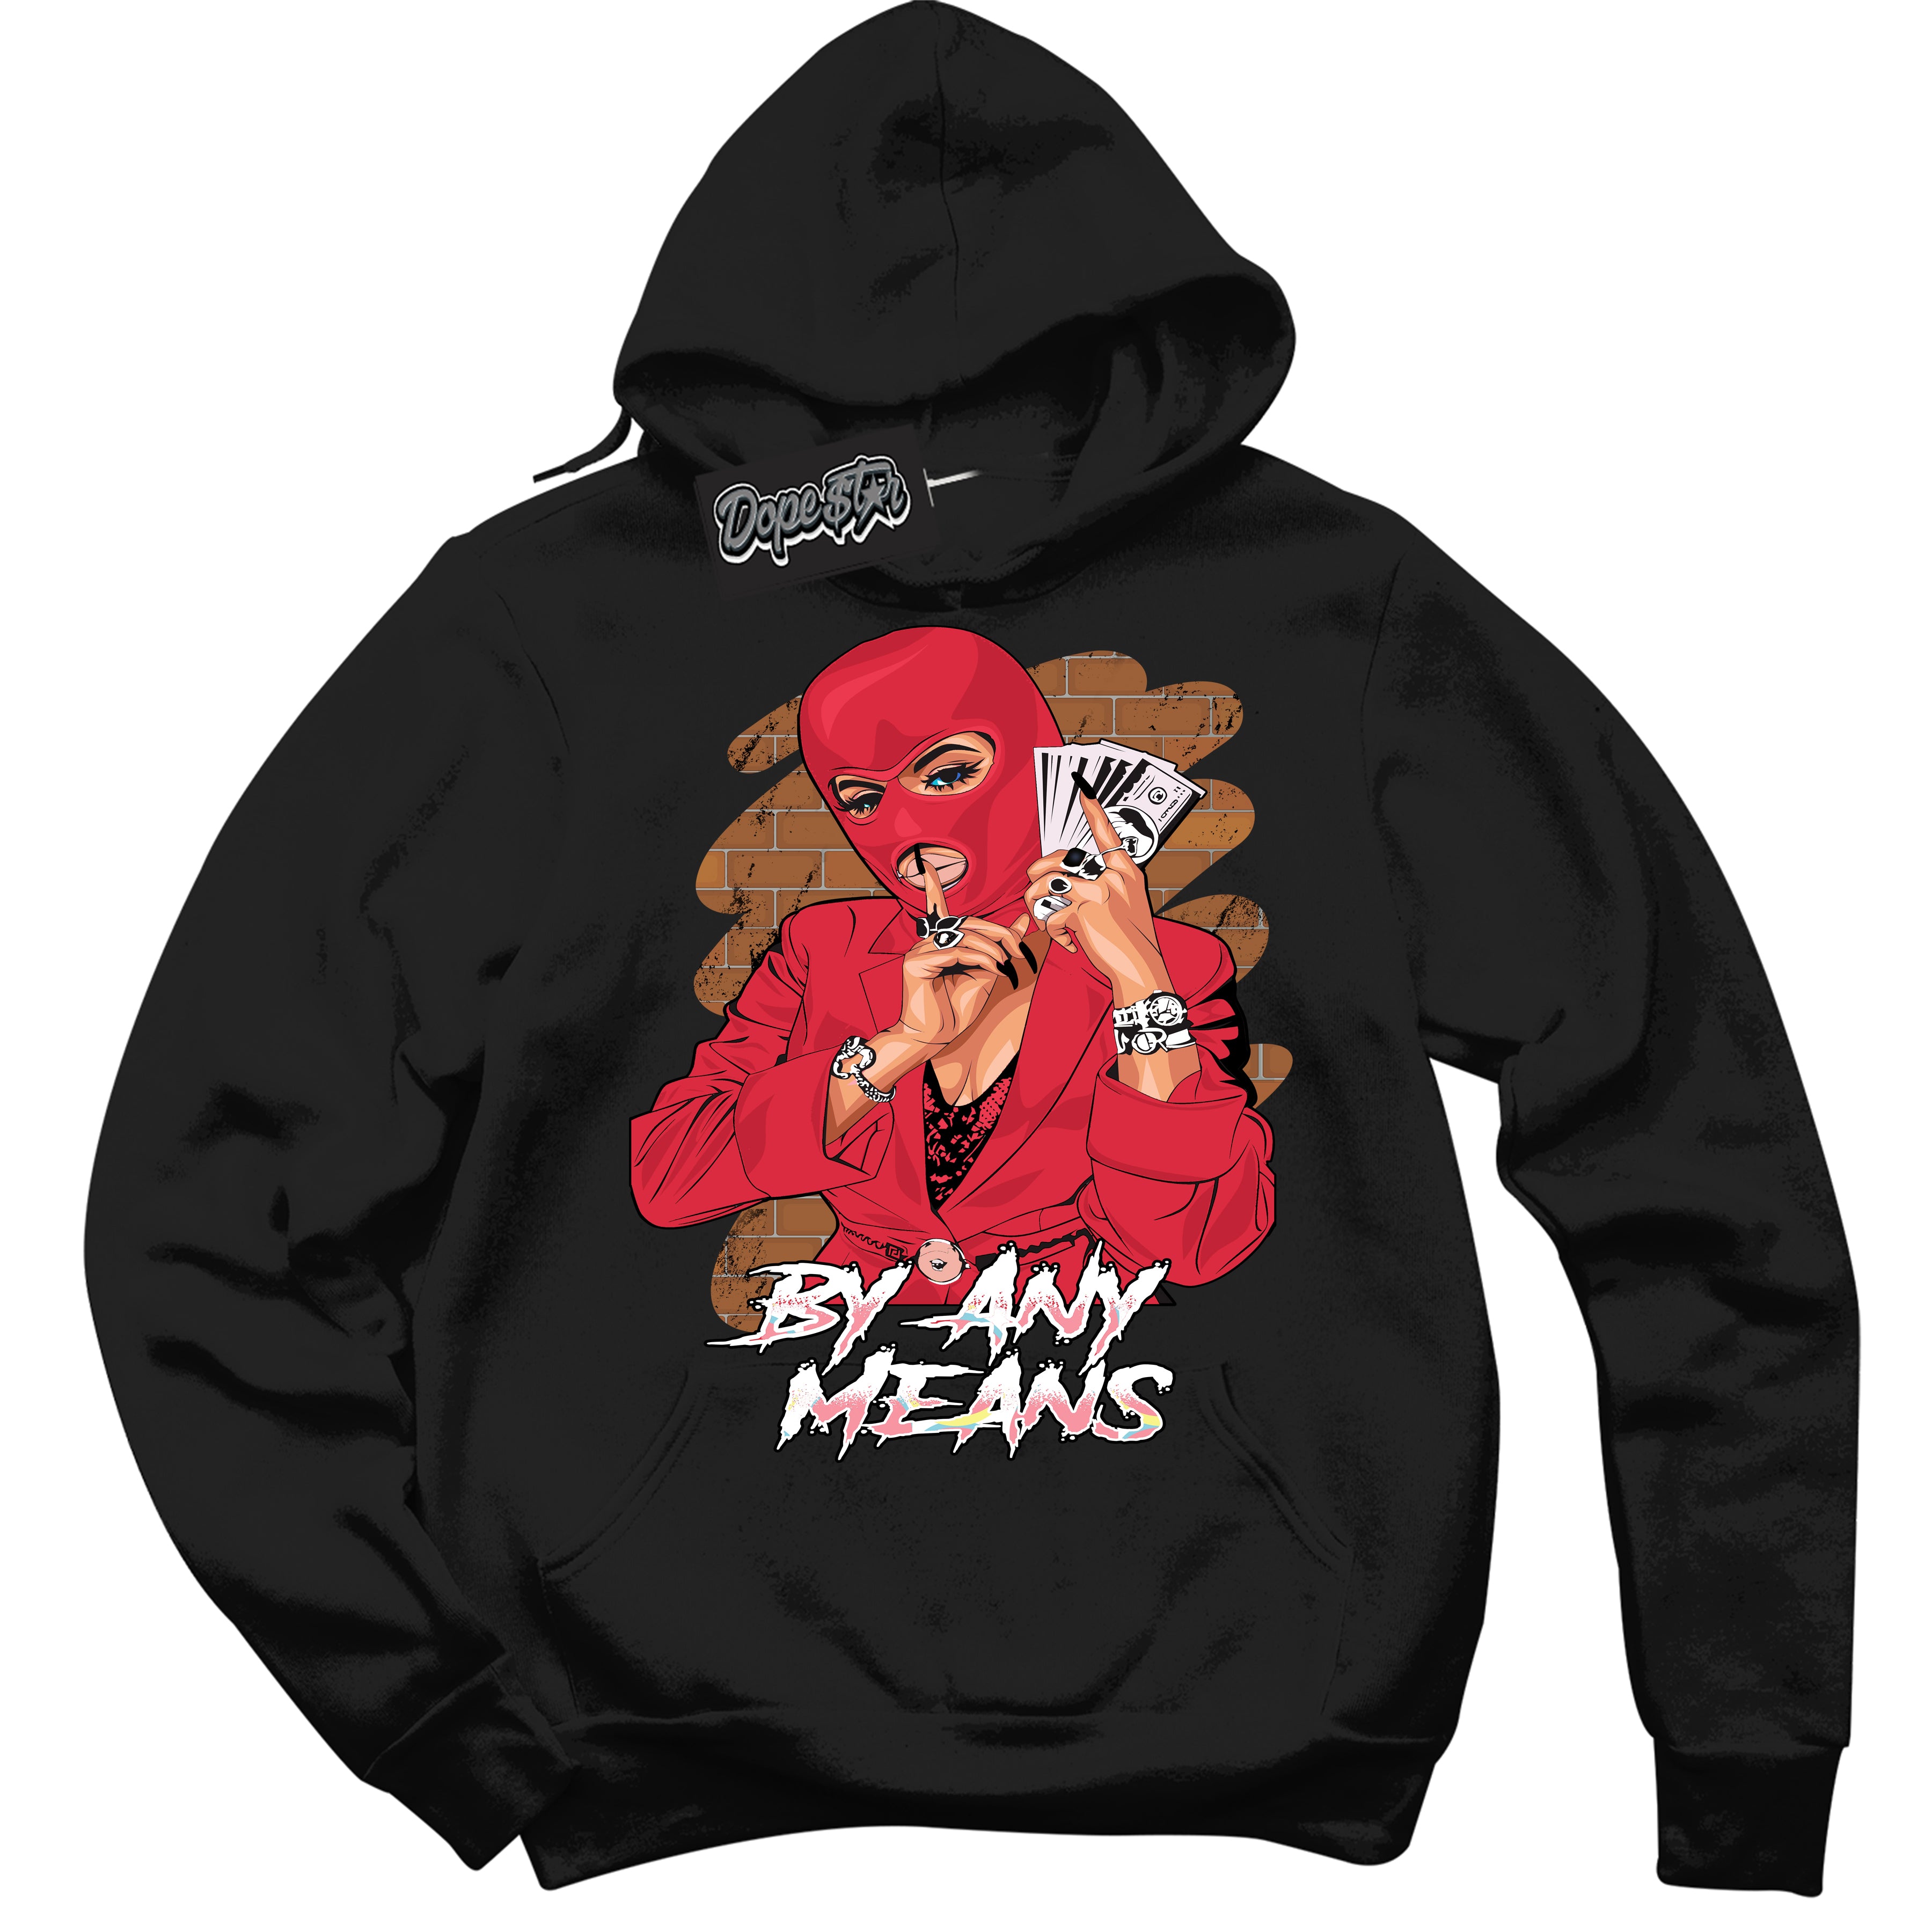 Cool Black Graphic DopeStar Hoodie with “ By Any Means “ print, that perfectly matches Spider-Verse 1s sneakers